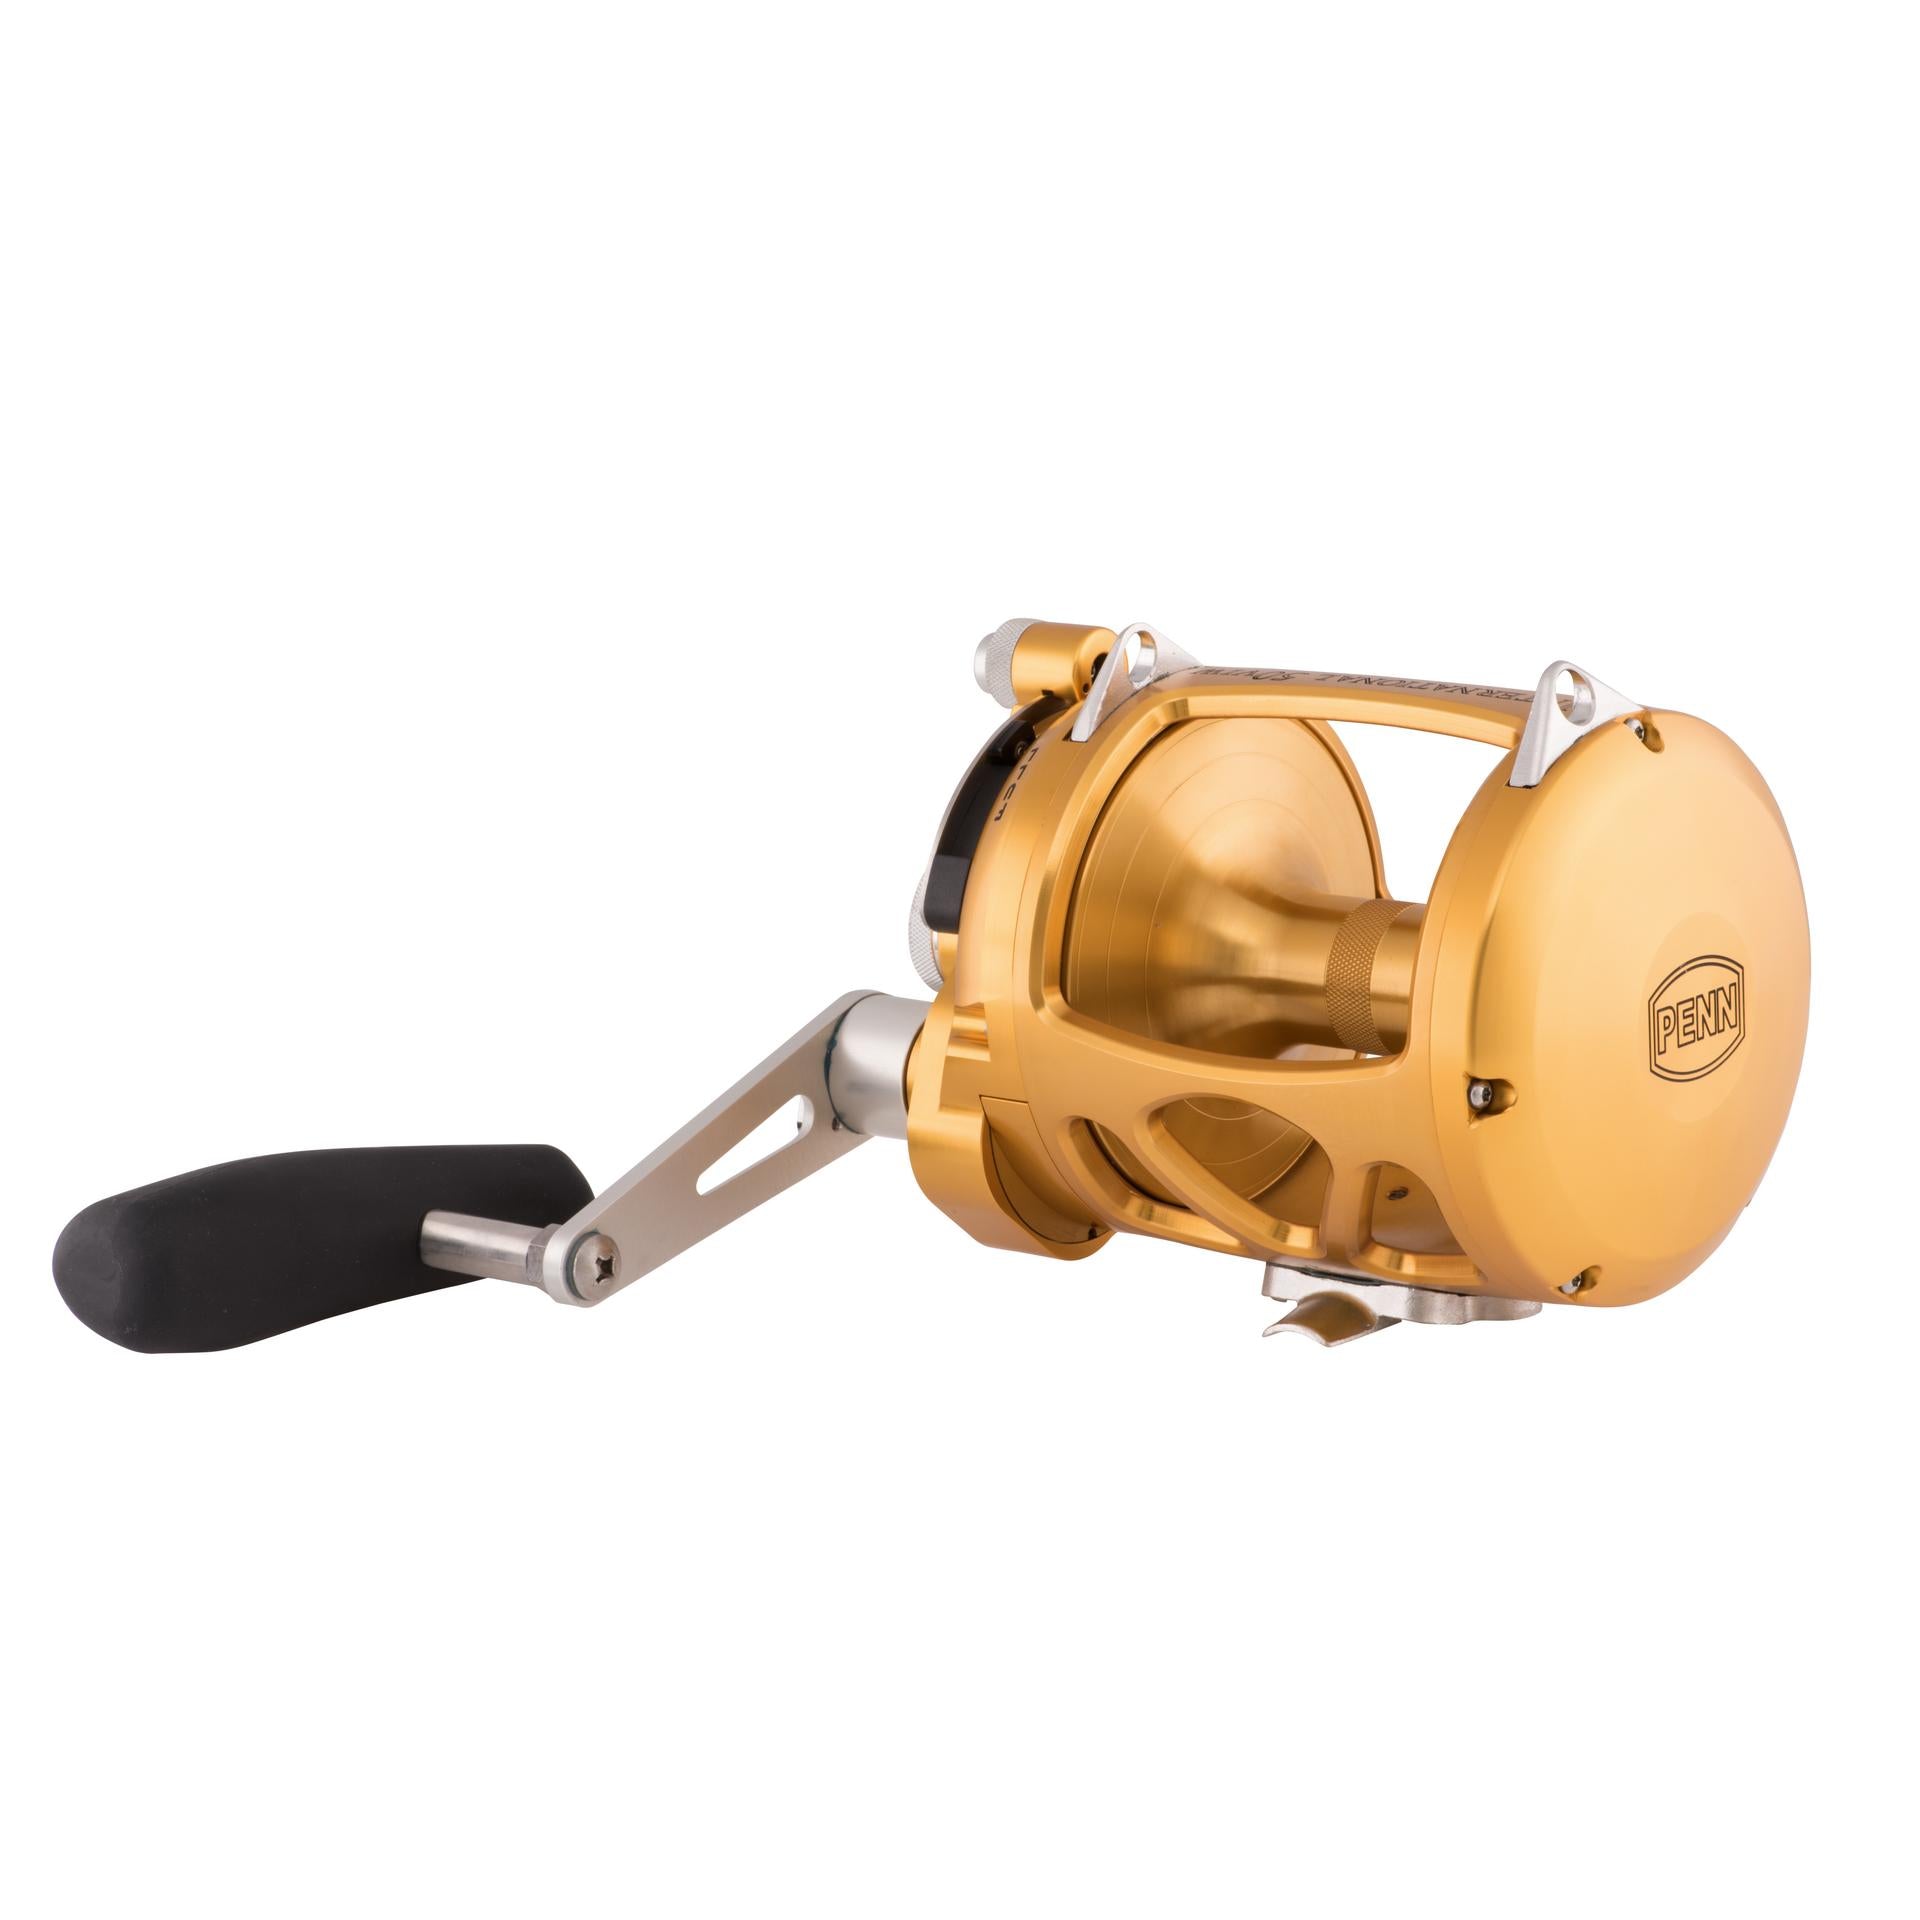 Special Offers - Penn Fishing International V Series Reels 12V - In stock &  Free Shipping. You can save more m…